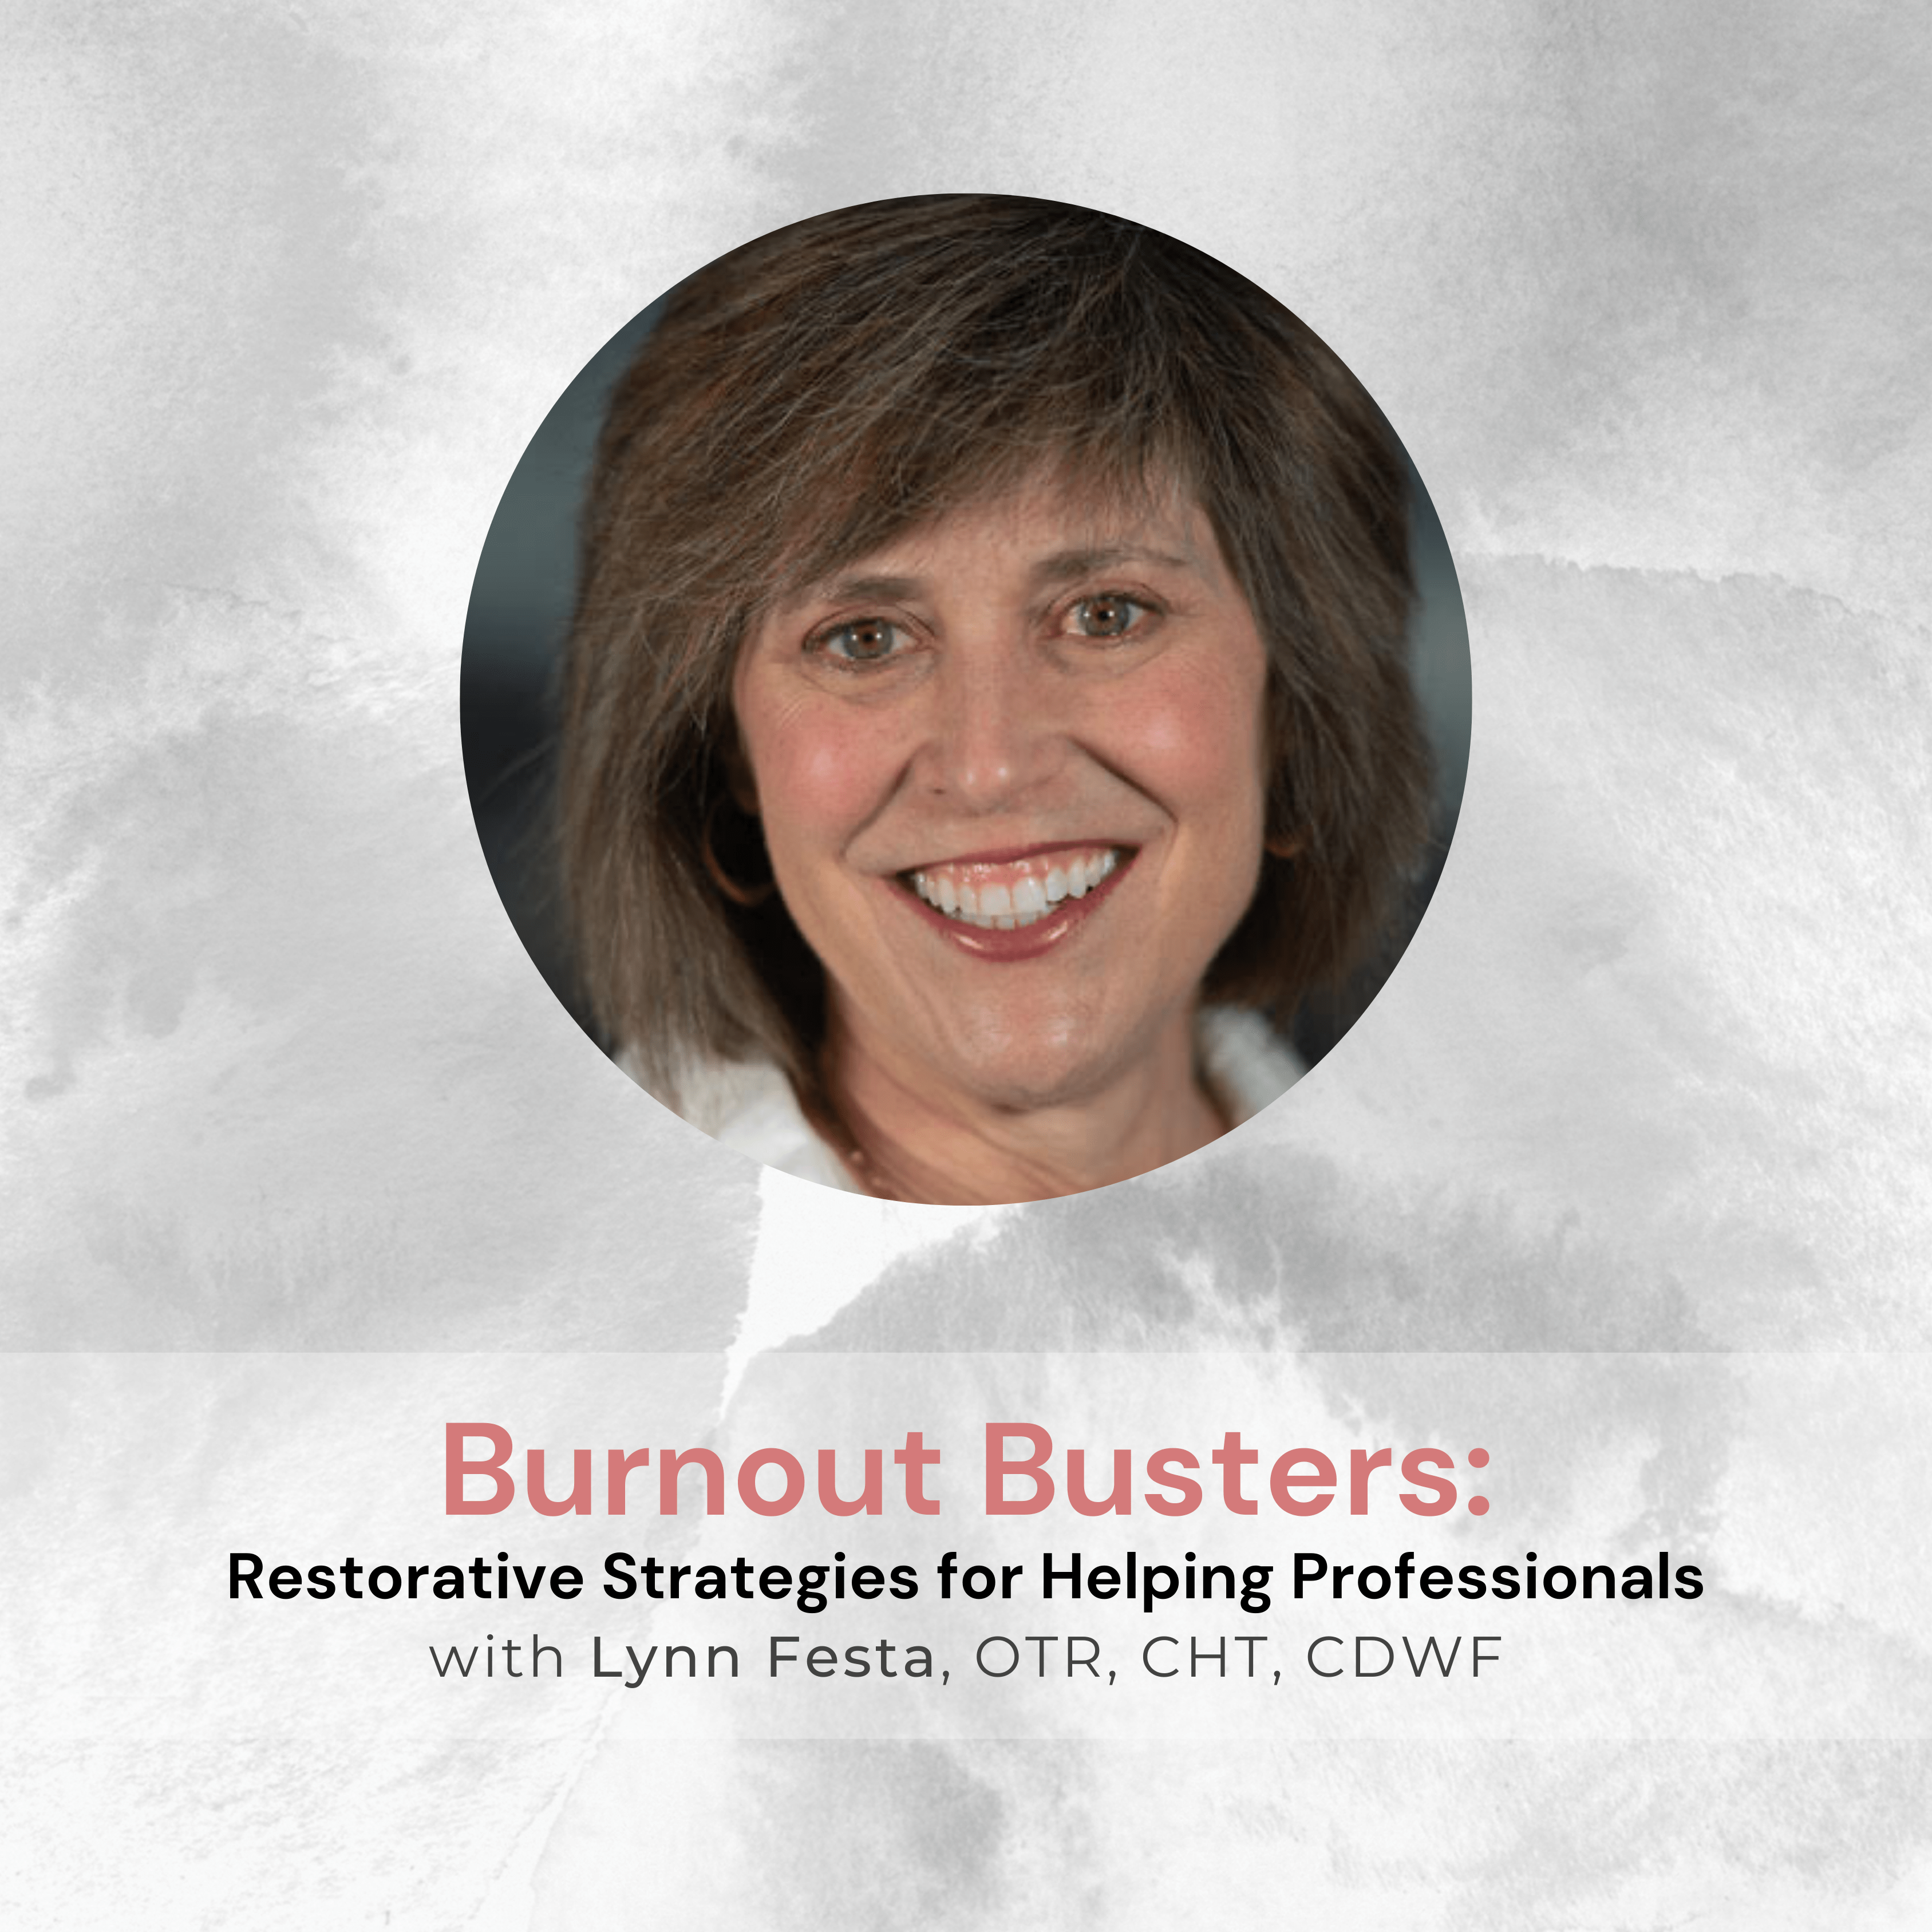 Burnout Busters: Restorative Strategies for Helping Professionals